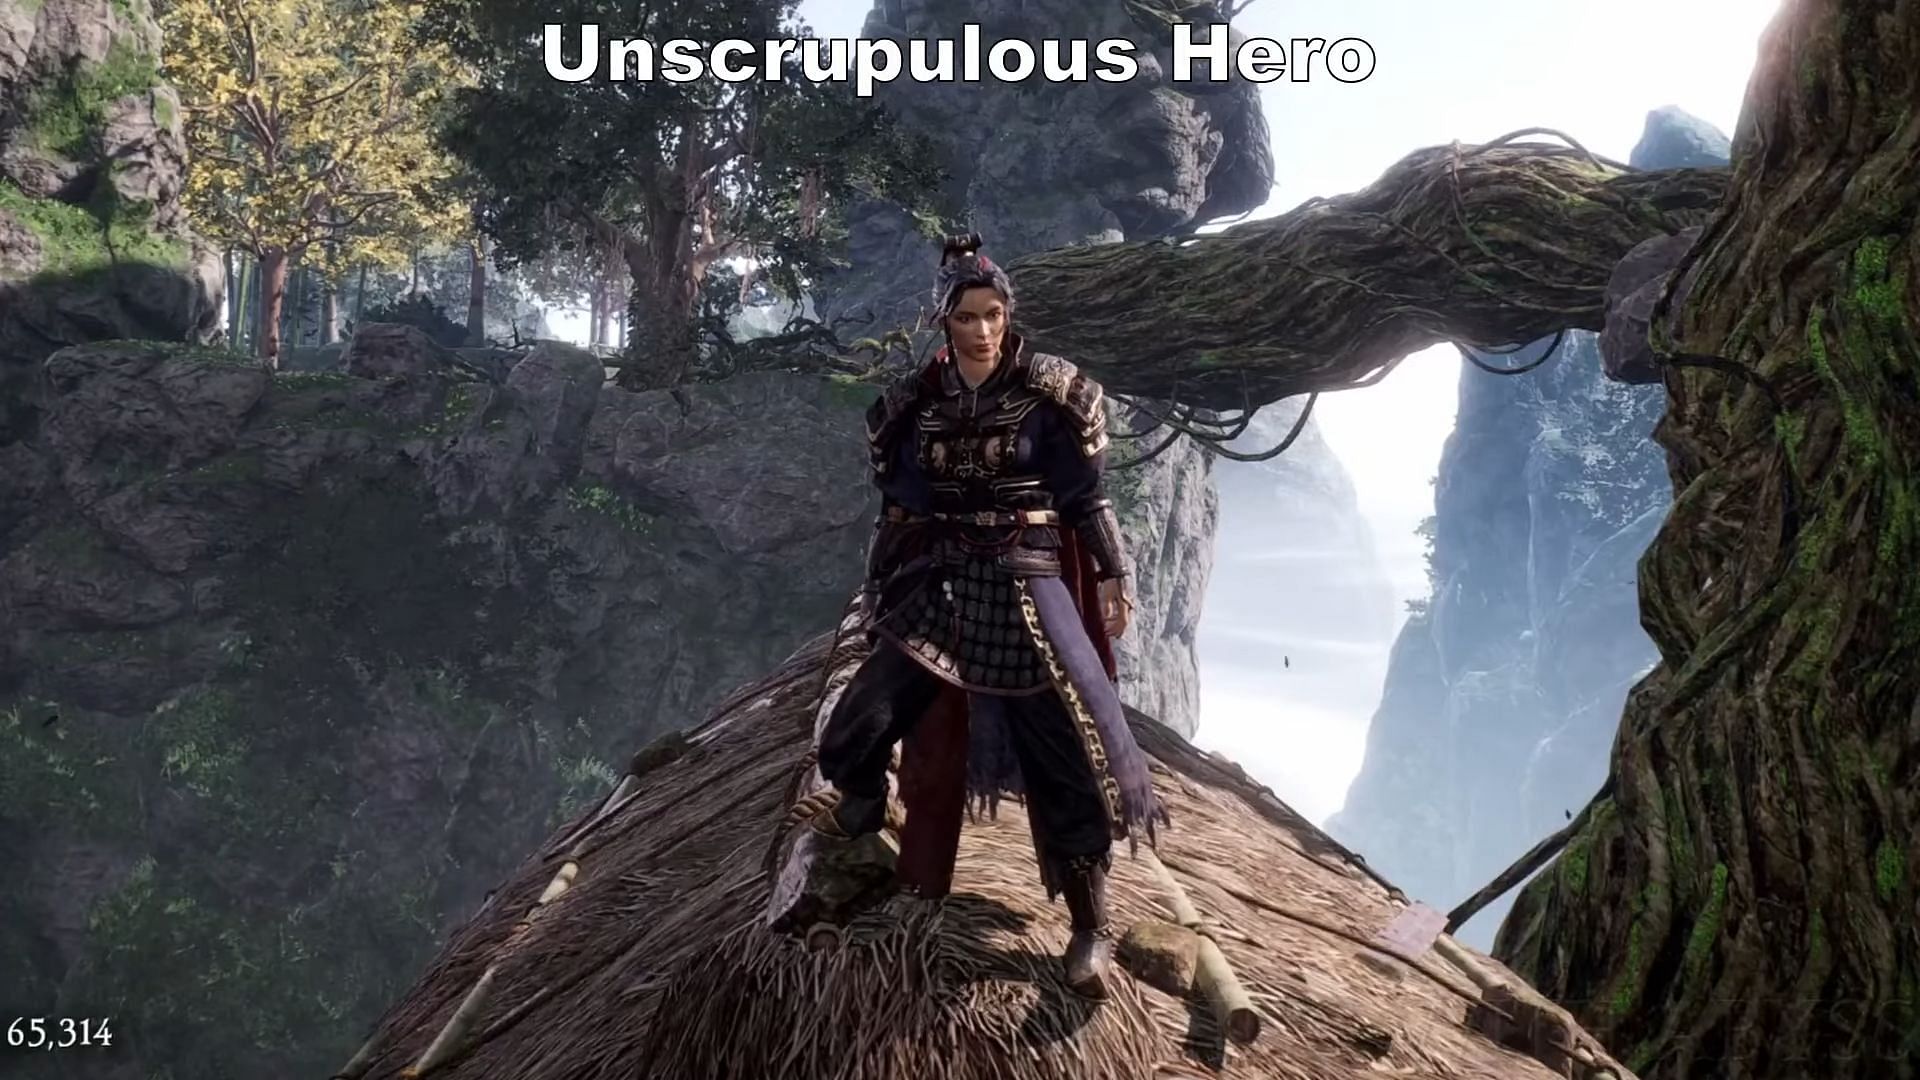 Unscrupulous Hero heavy armor set (Image via YouTube Channel Gaming with Abyss)